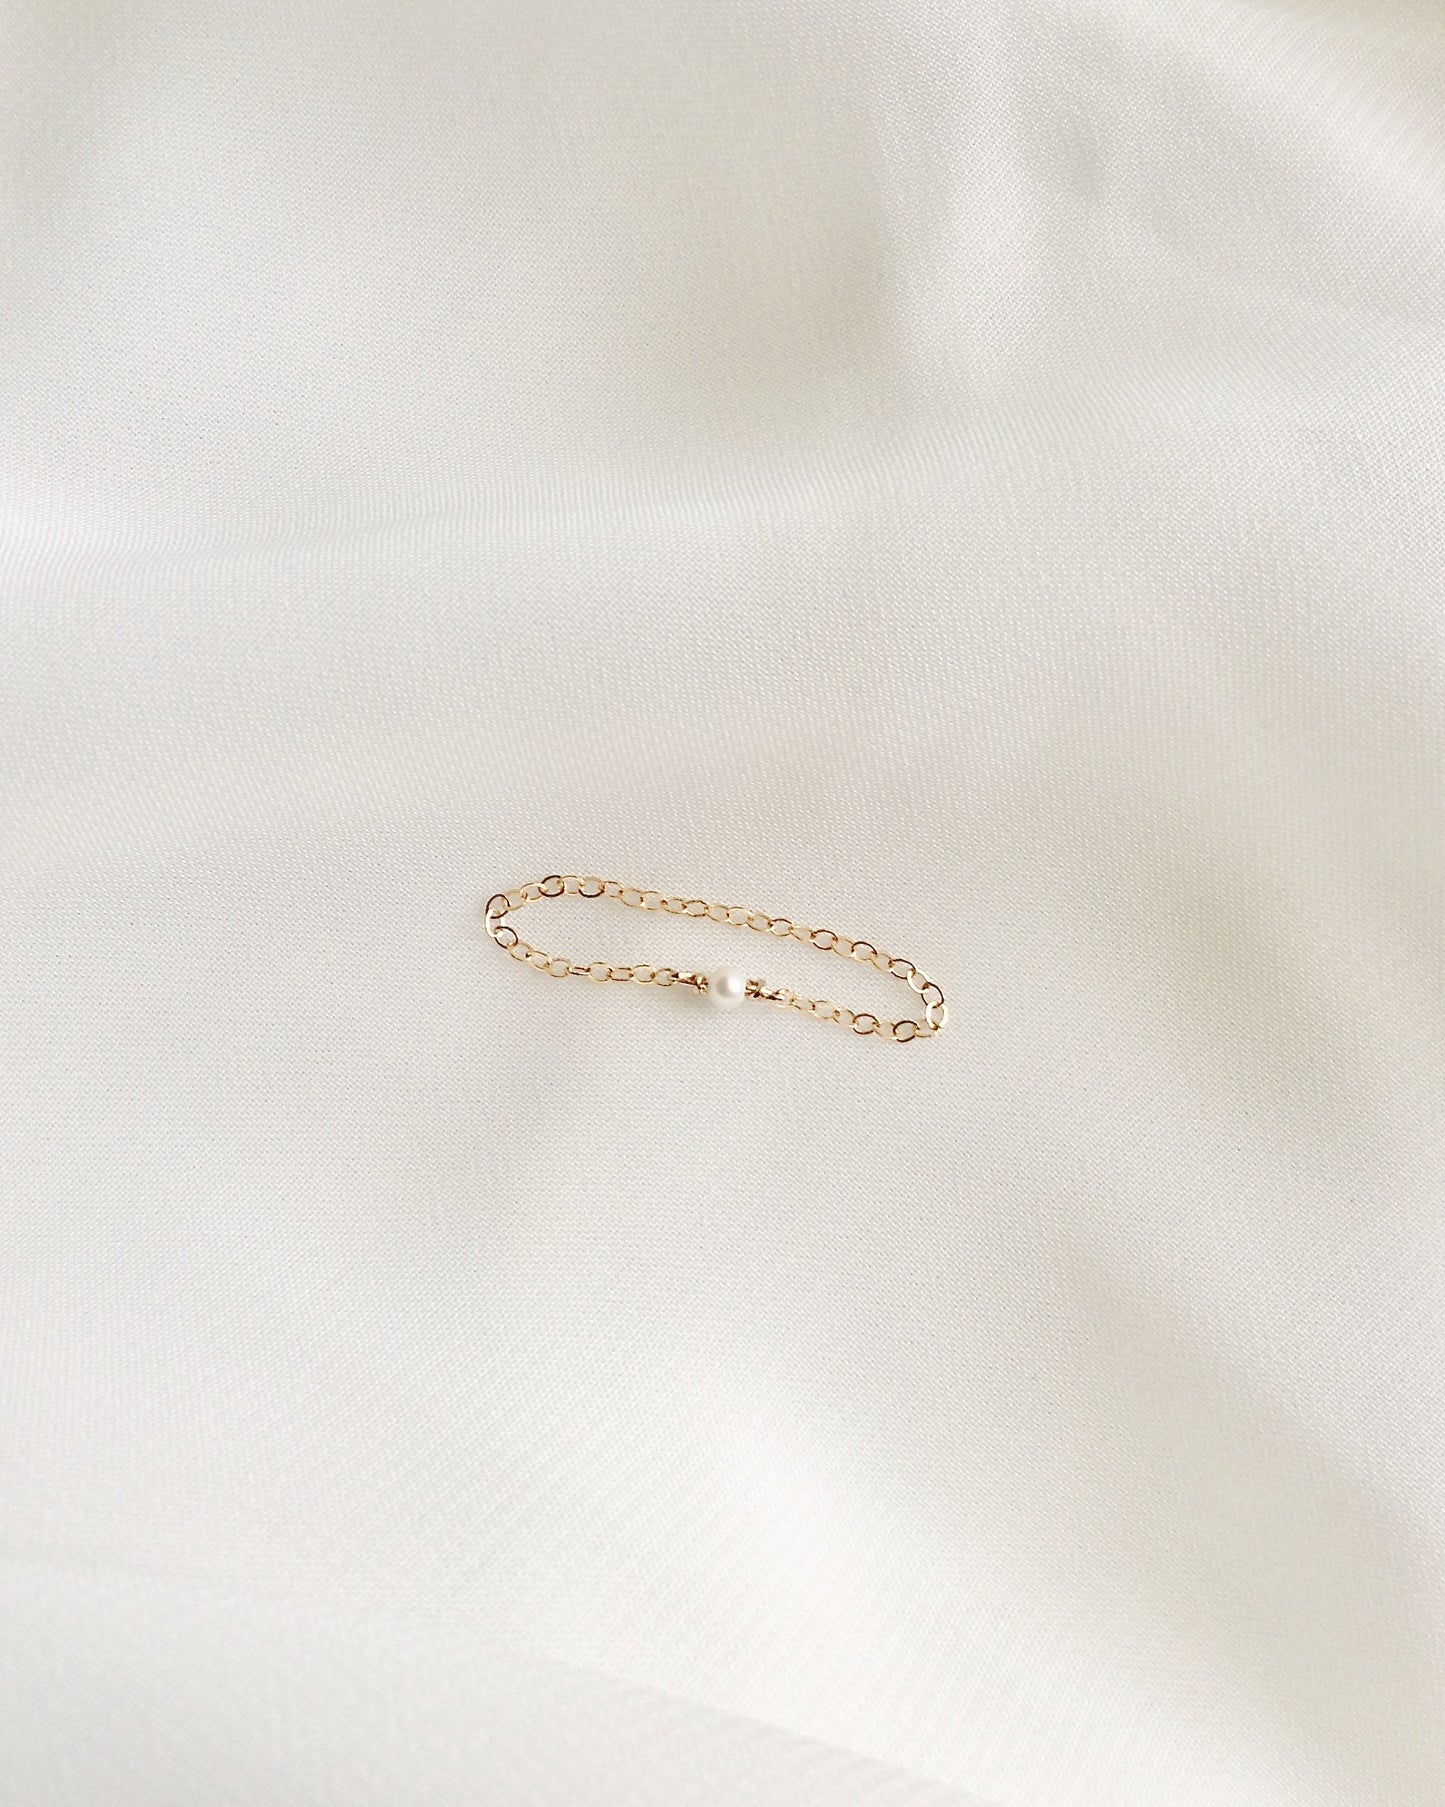 Tiny Freshwater Pearl Ring | Delicate Chain Ring in Gold Filled or Sterling Silver | IB Jewelry